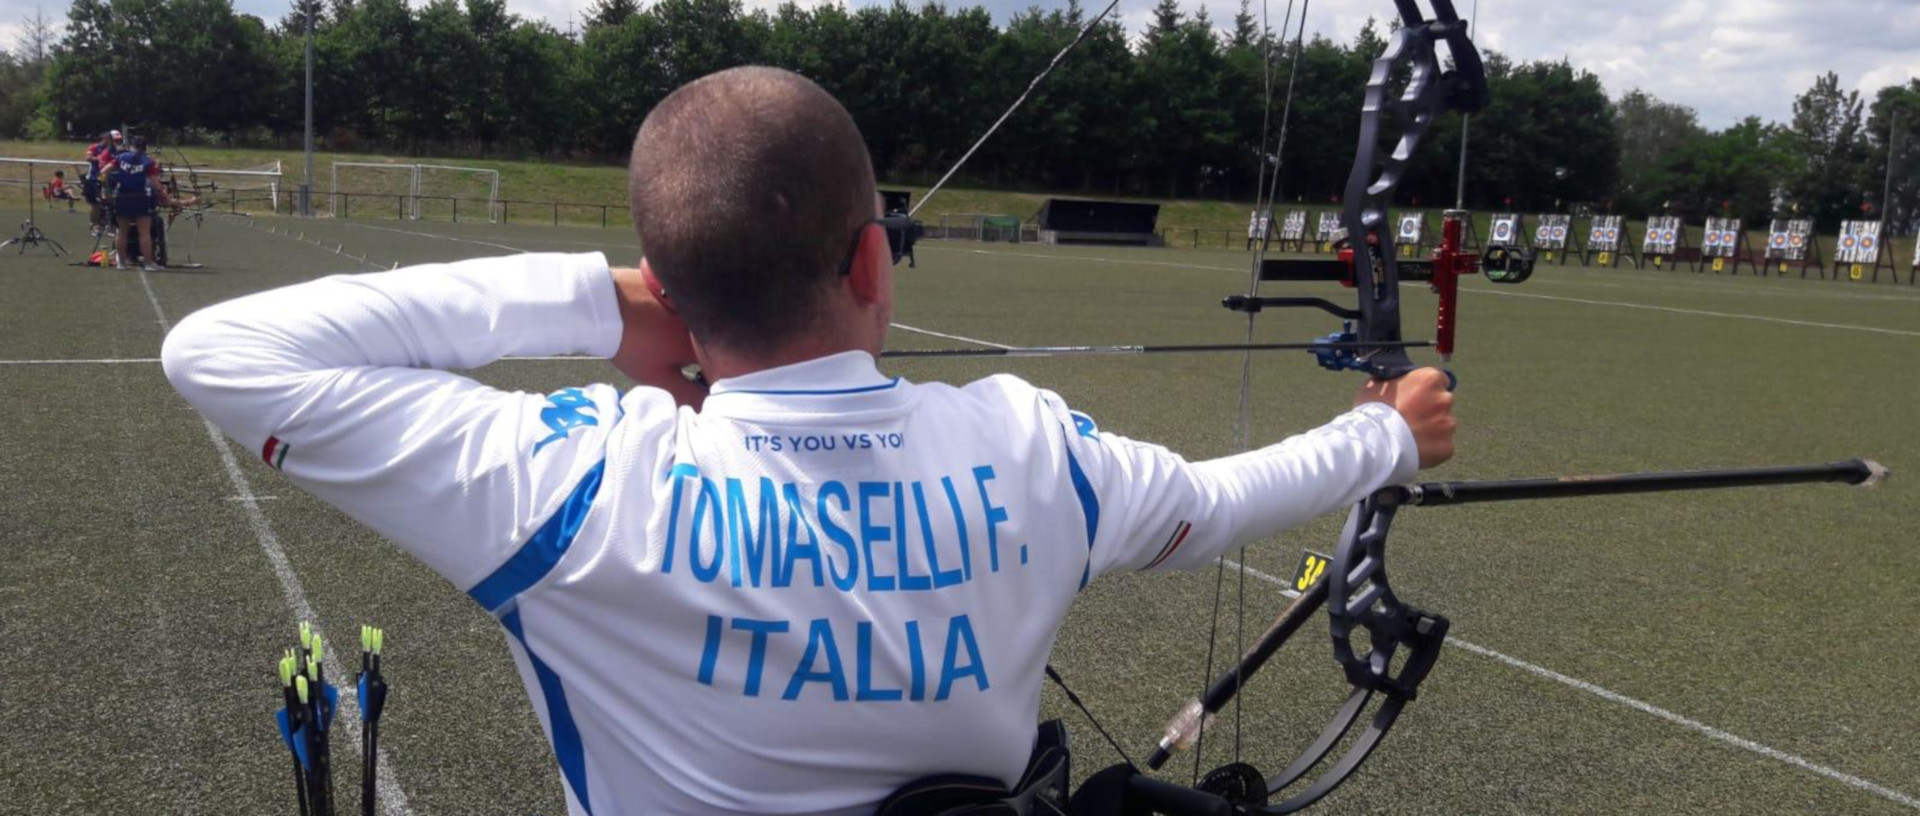 Francesco Tomaselli in Italy jersey